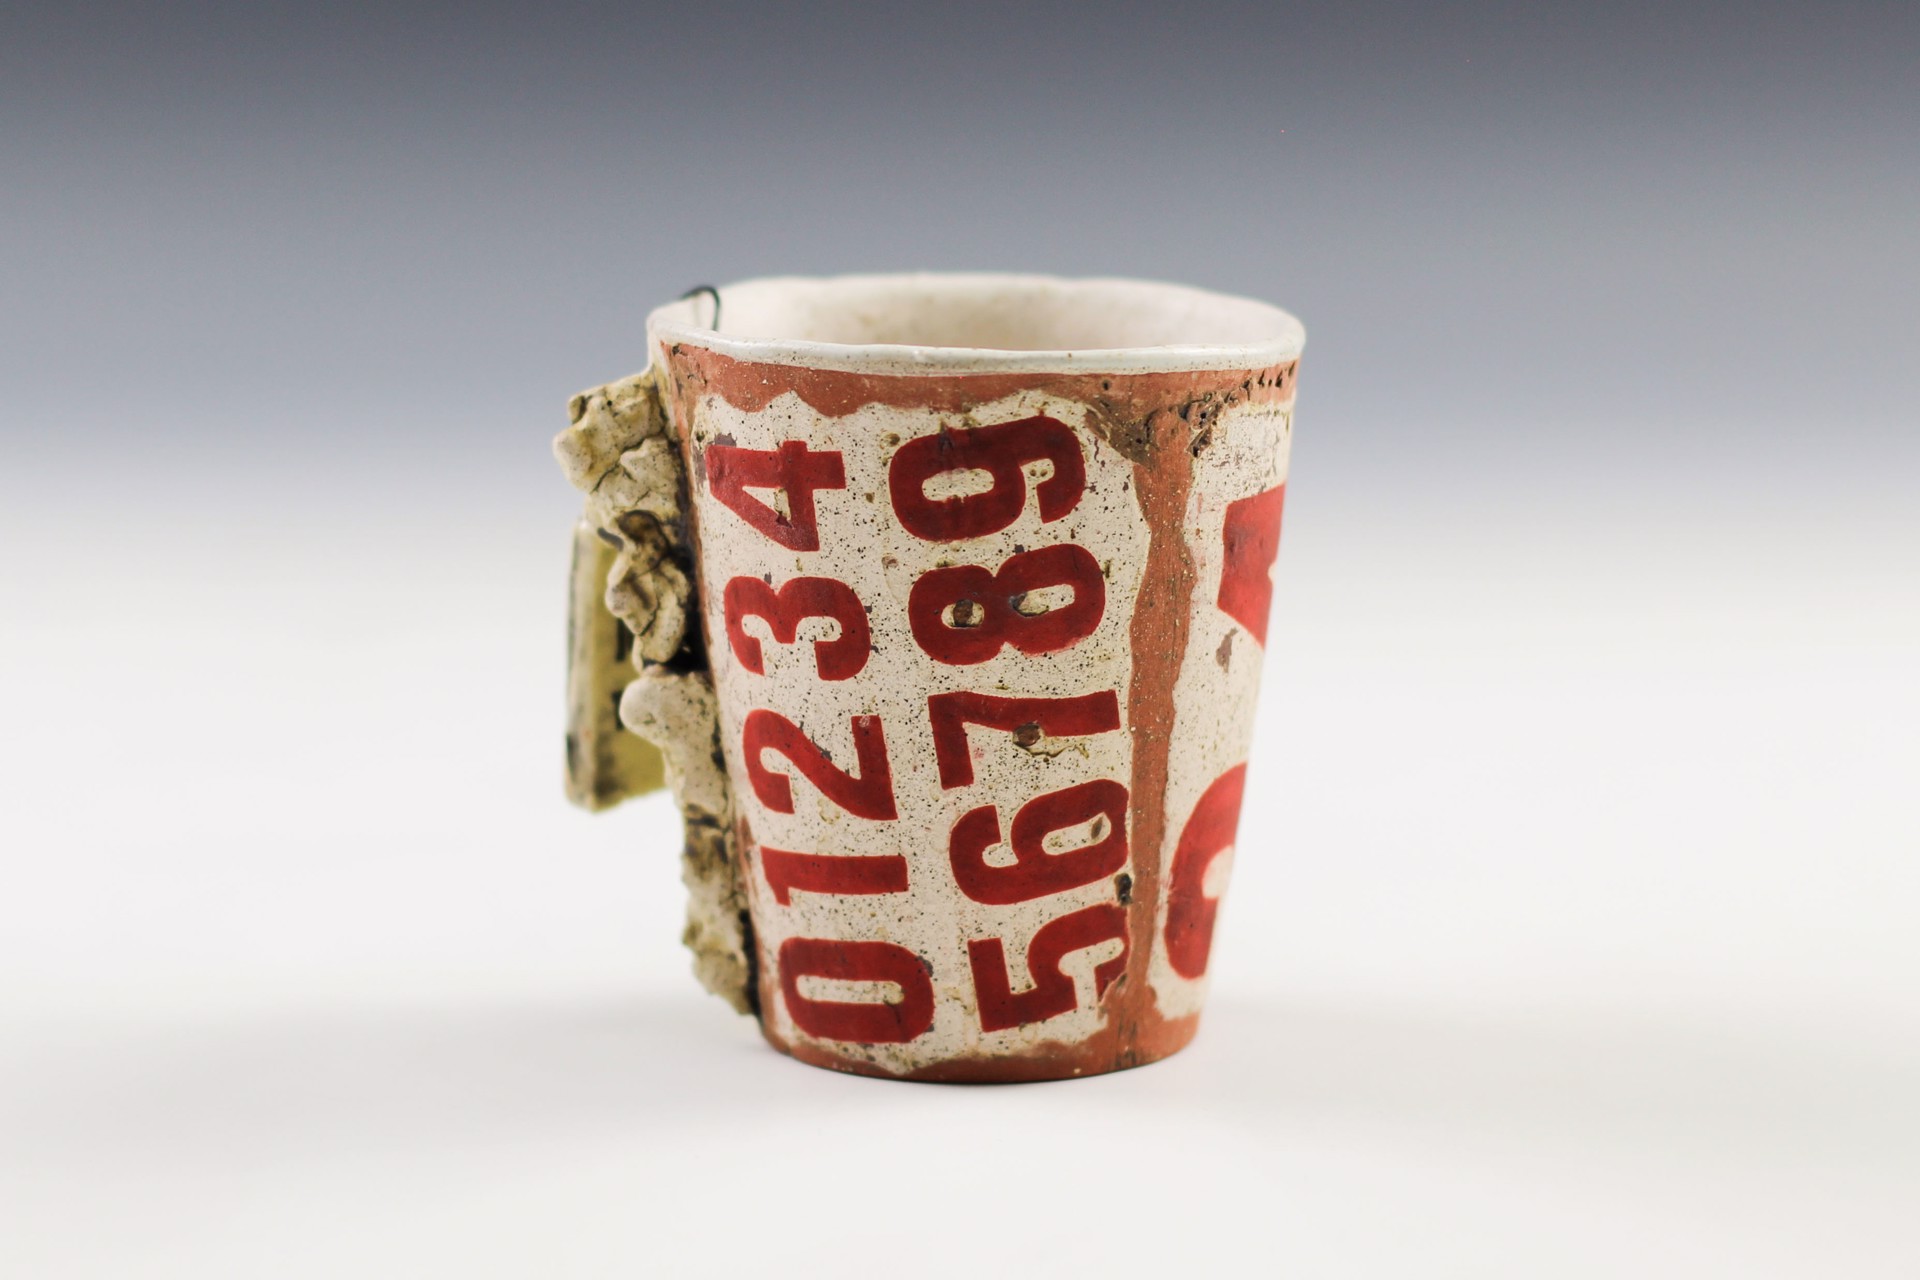 Just This Cup by Nancy Kubale